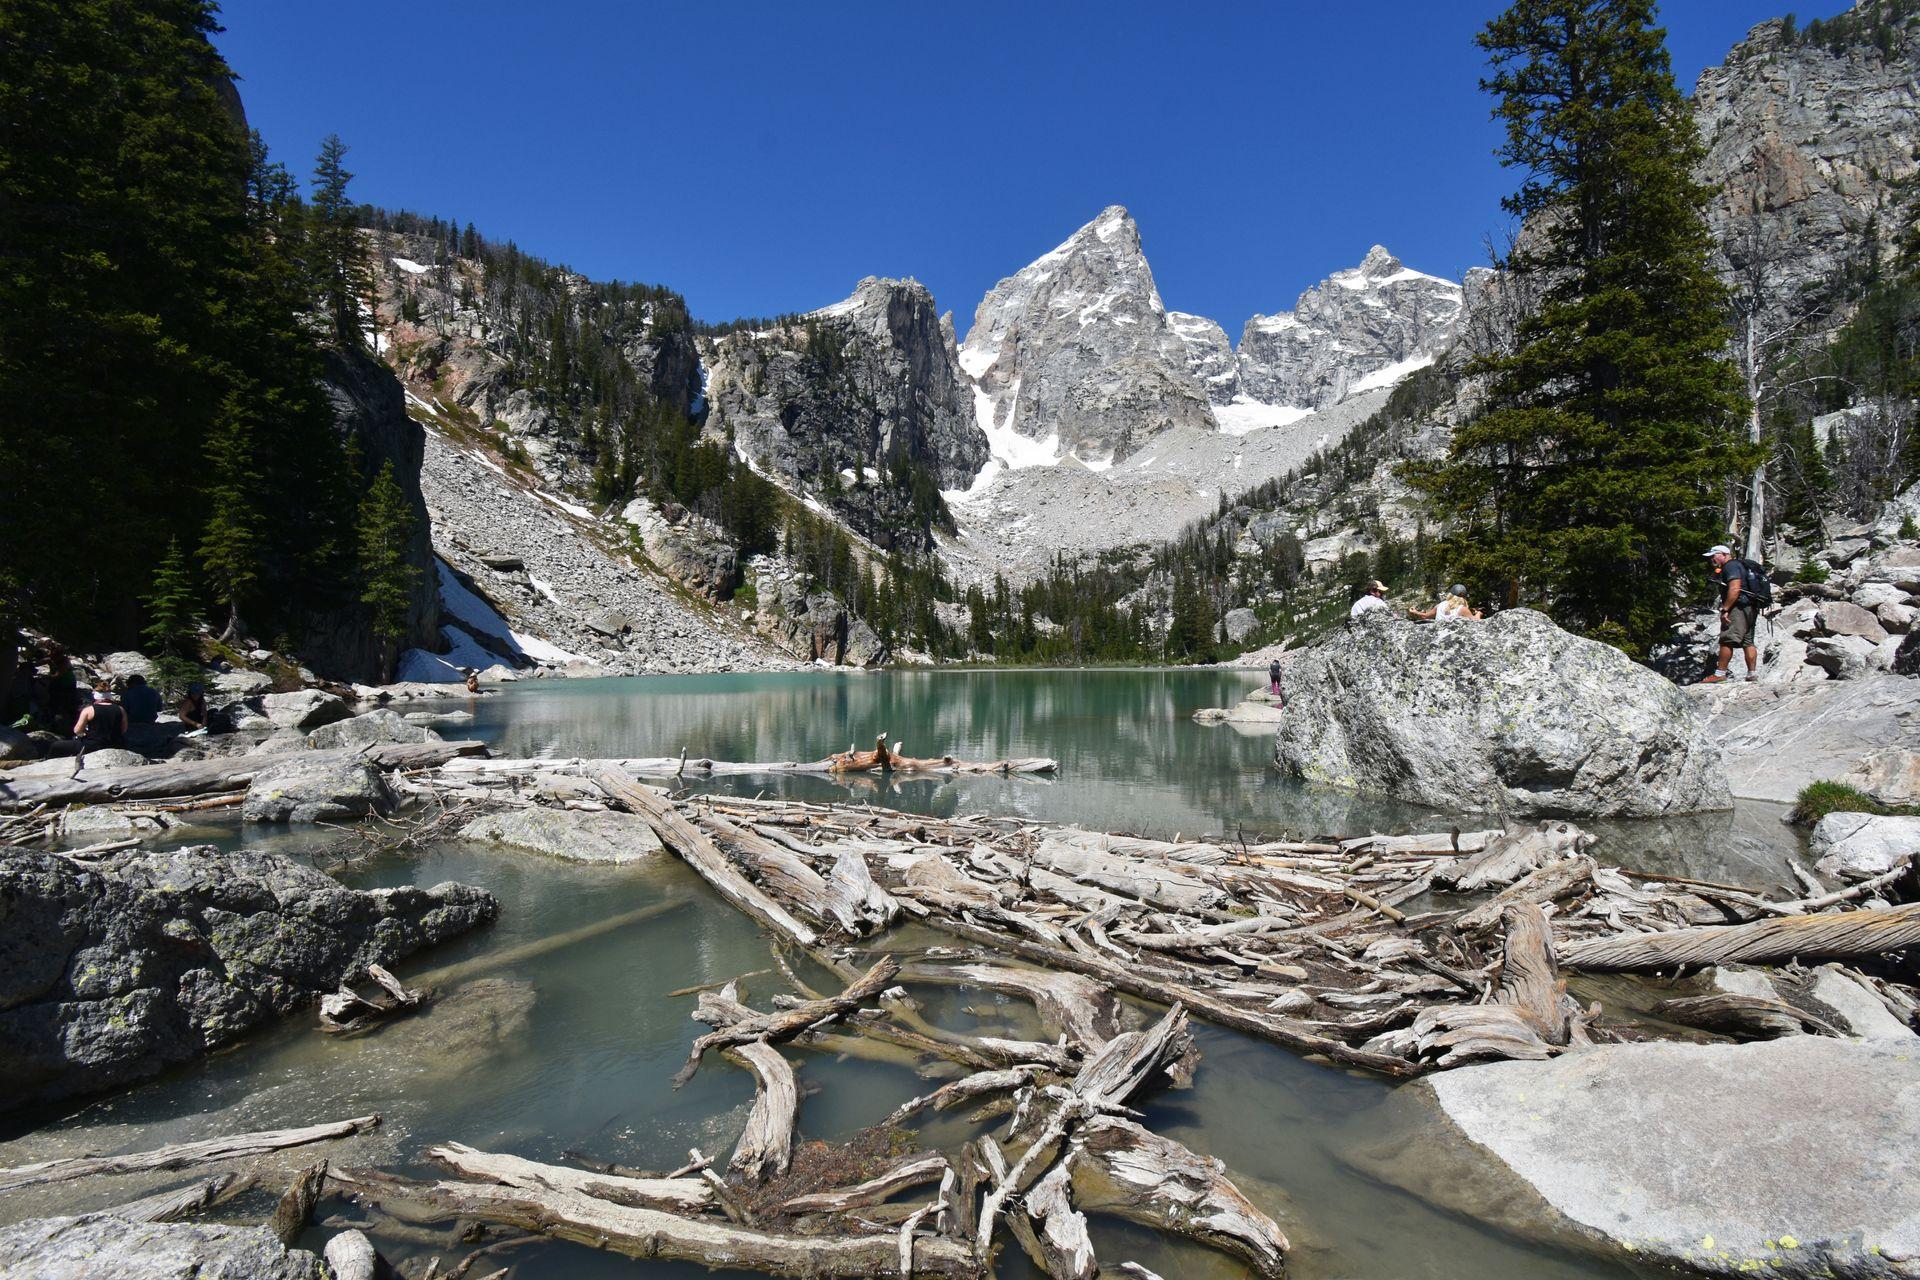 A lake with aqua green water and a jagged mountain peak in the background. There are several logs in the water.